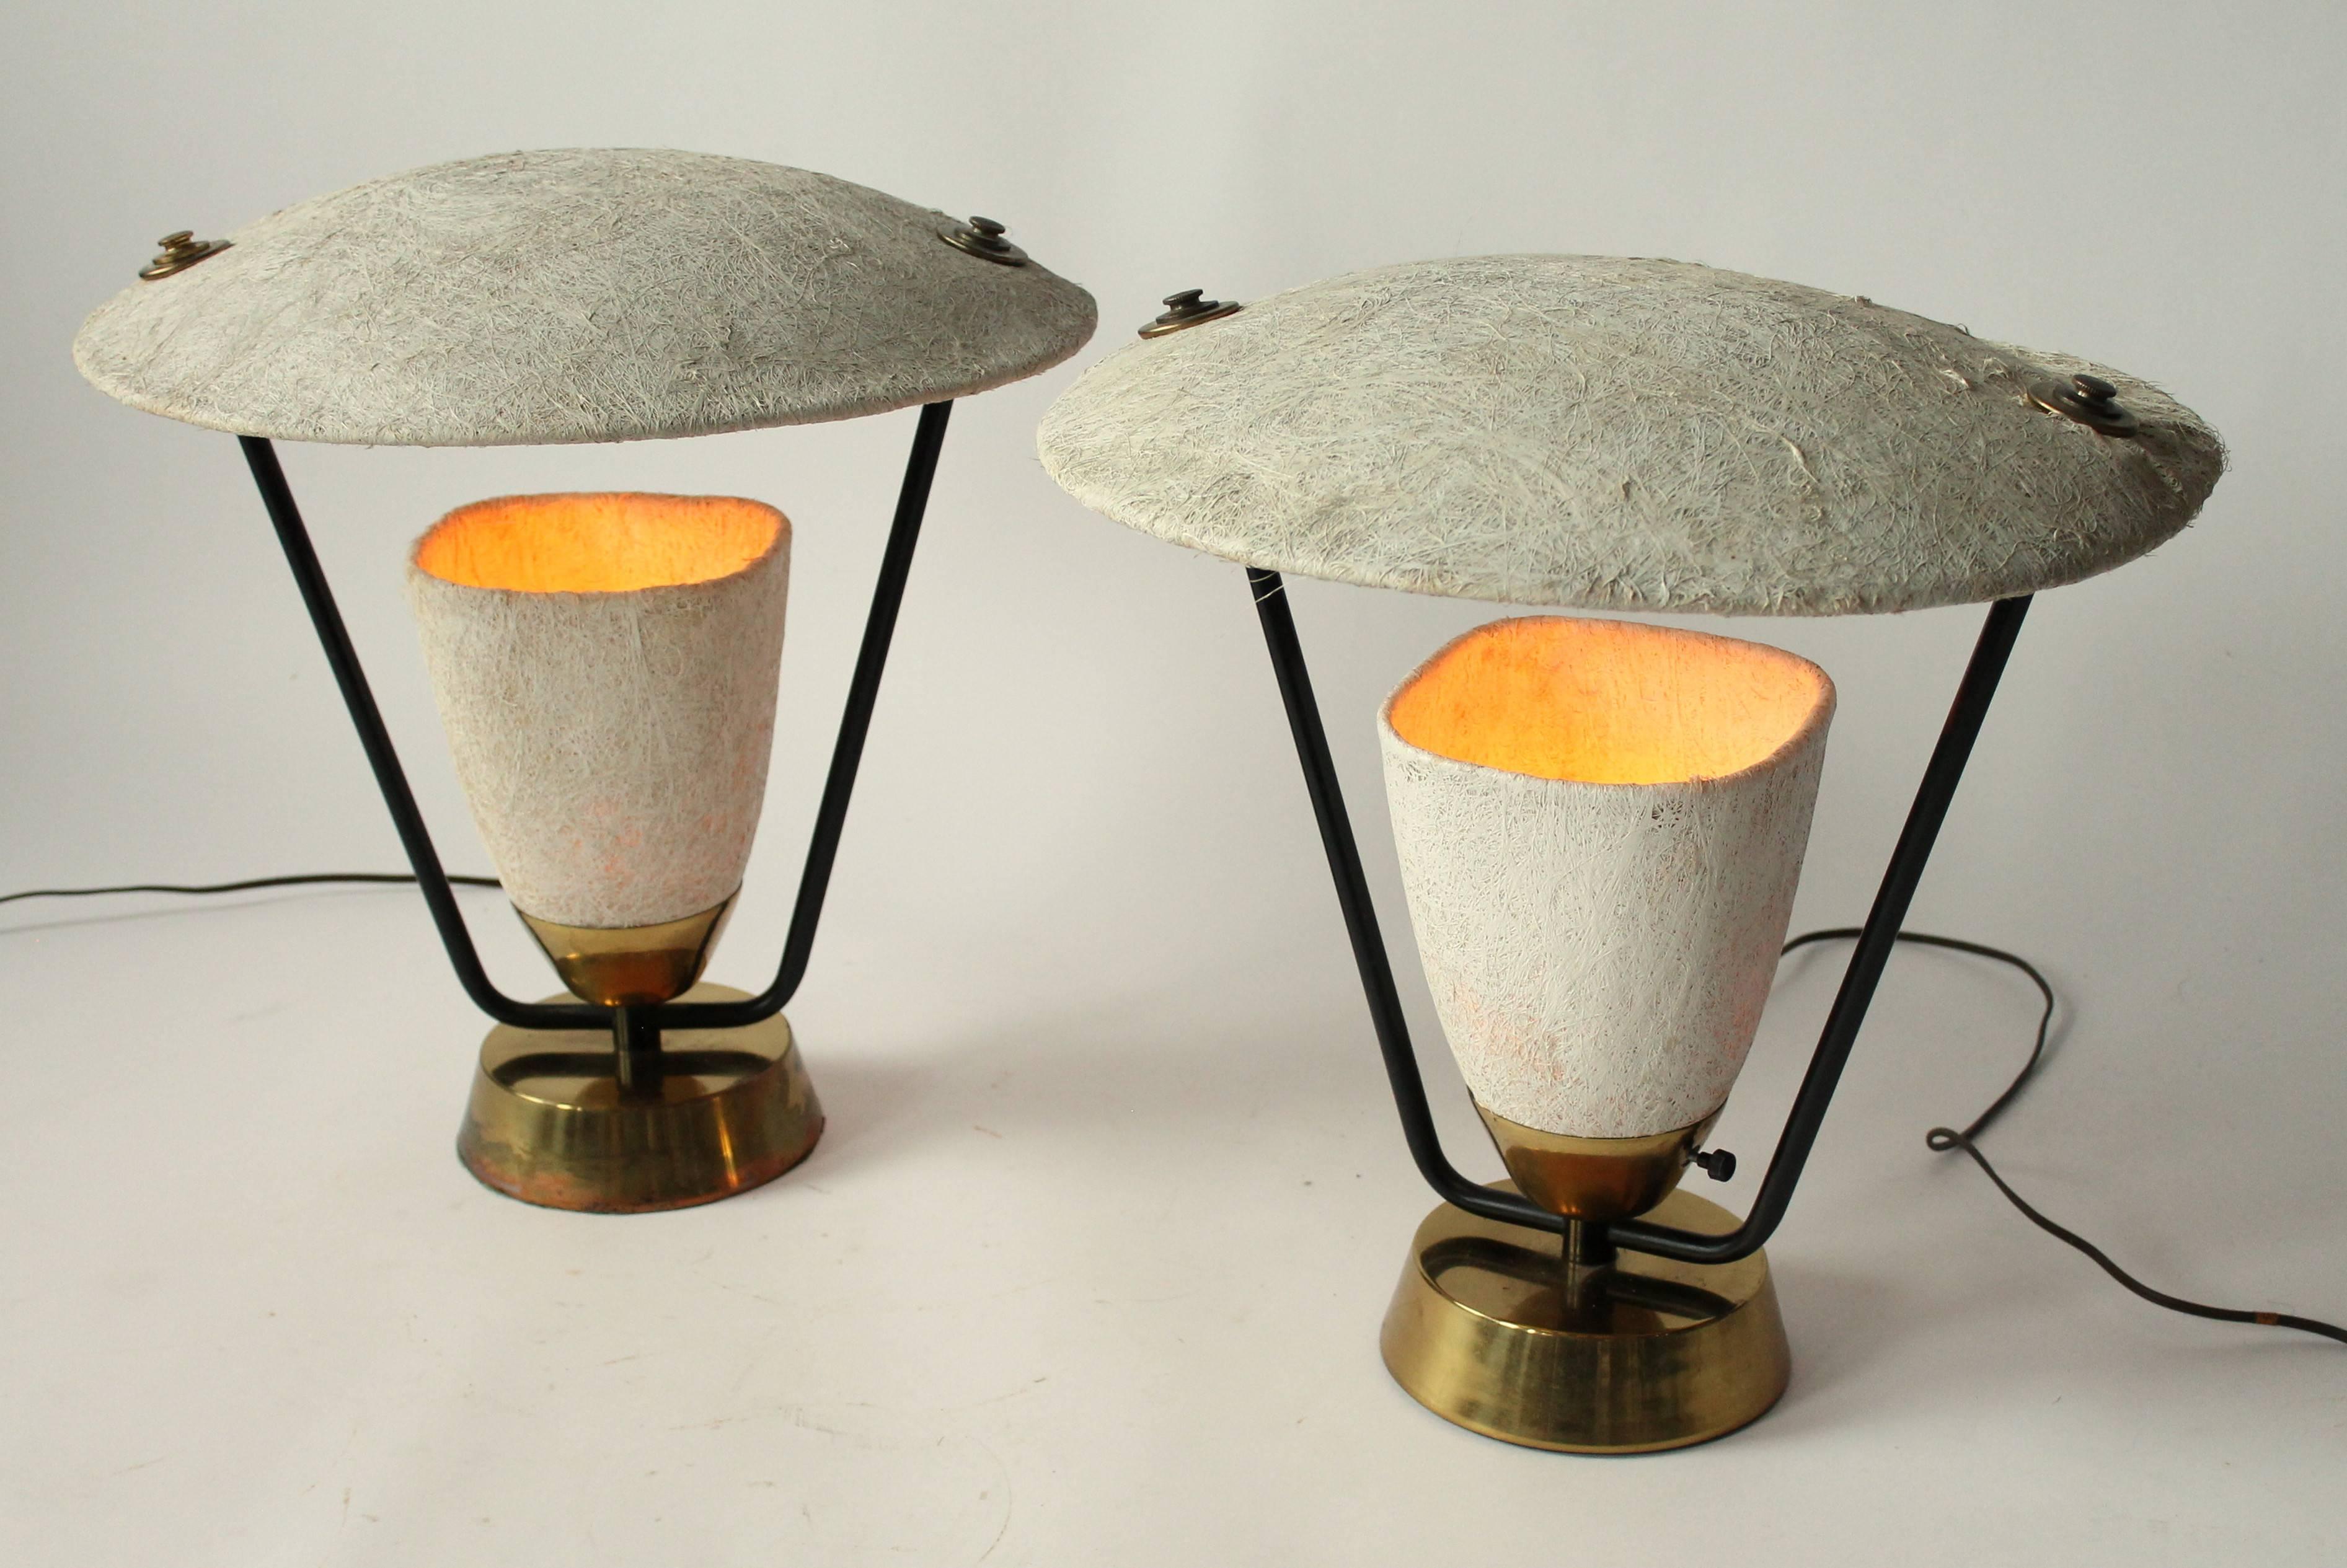 Brass Pair of Raw Fiberglass Table Lamp in the Style of Mitchell Bobrick, 1950s, USA